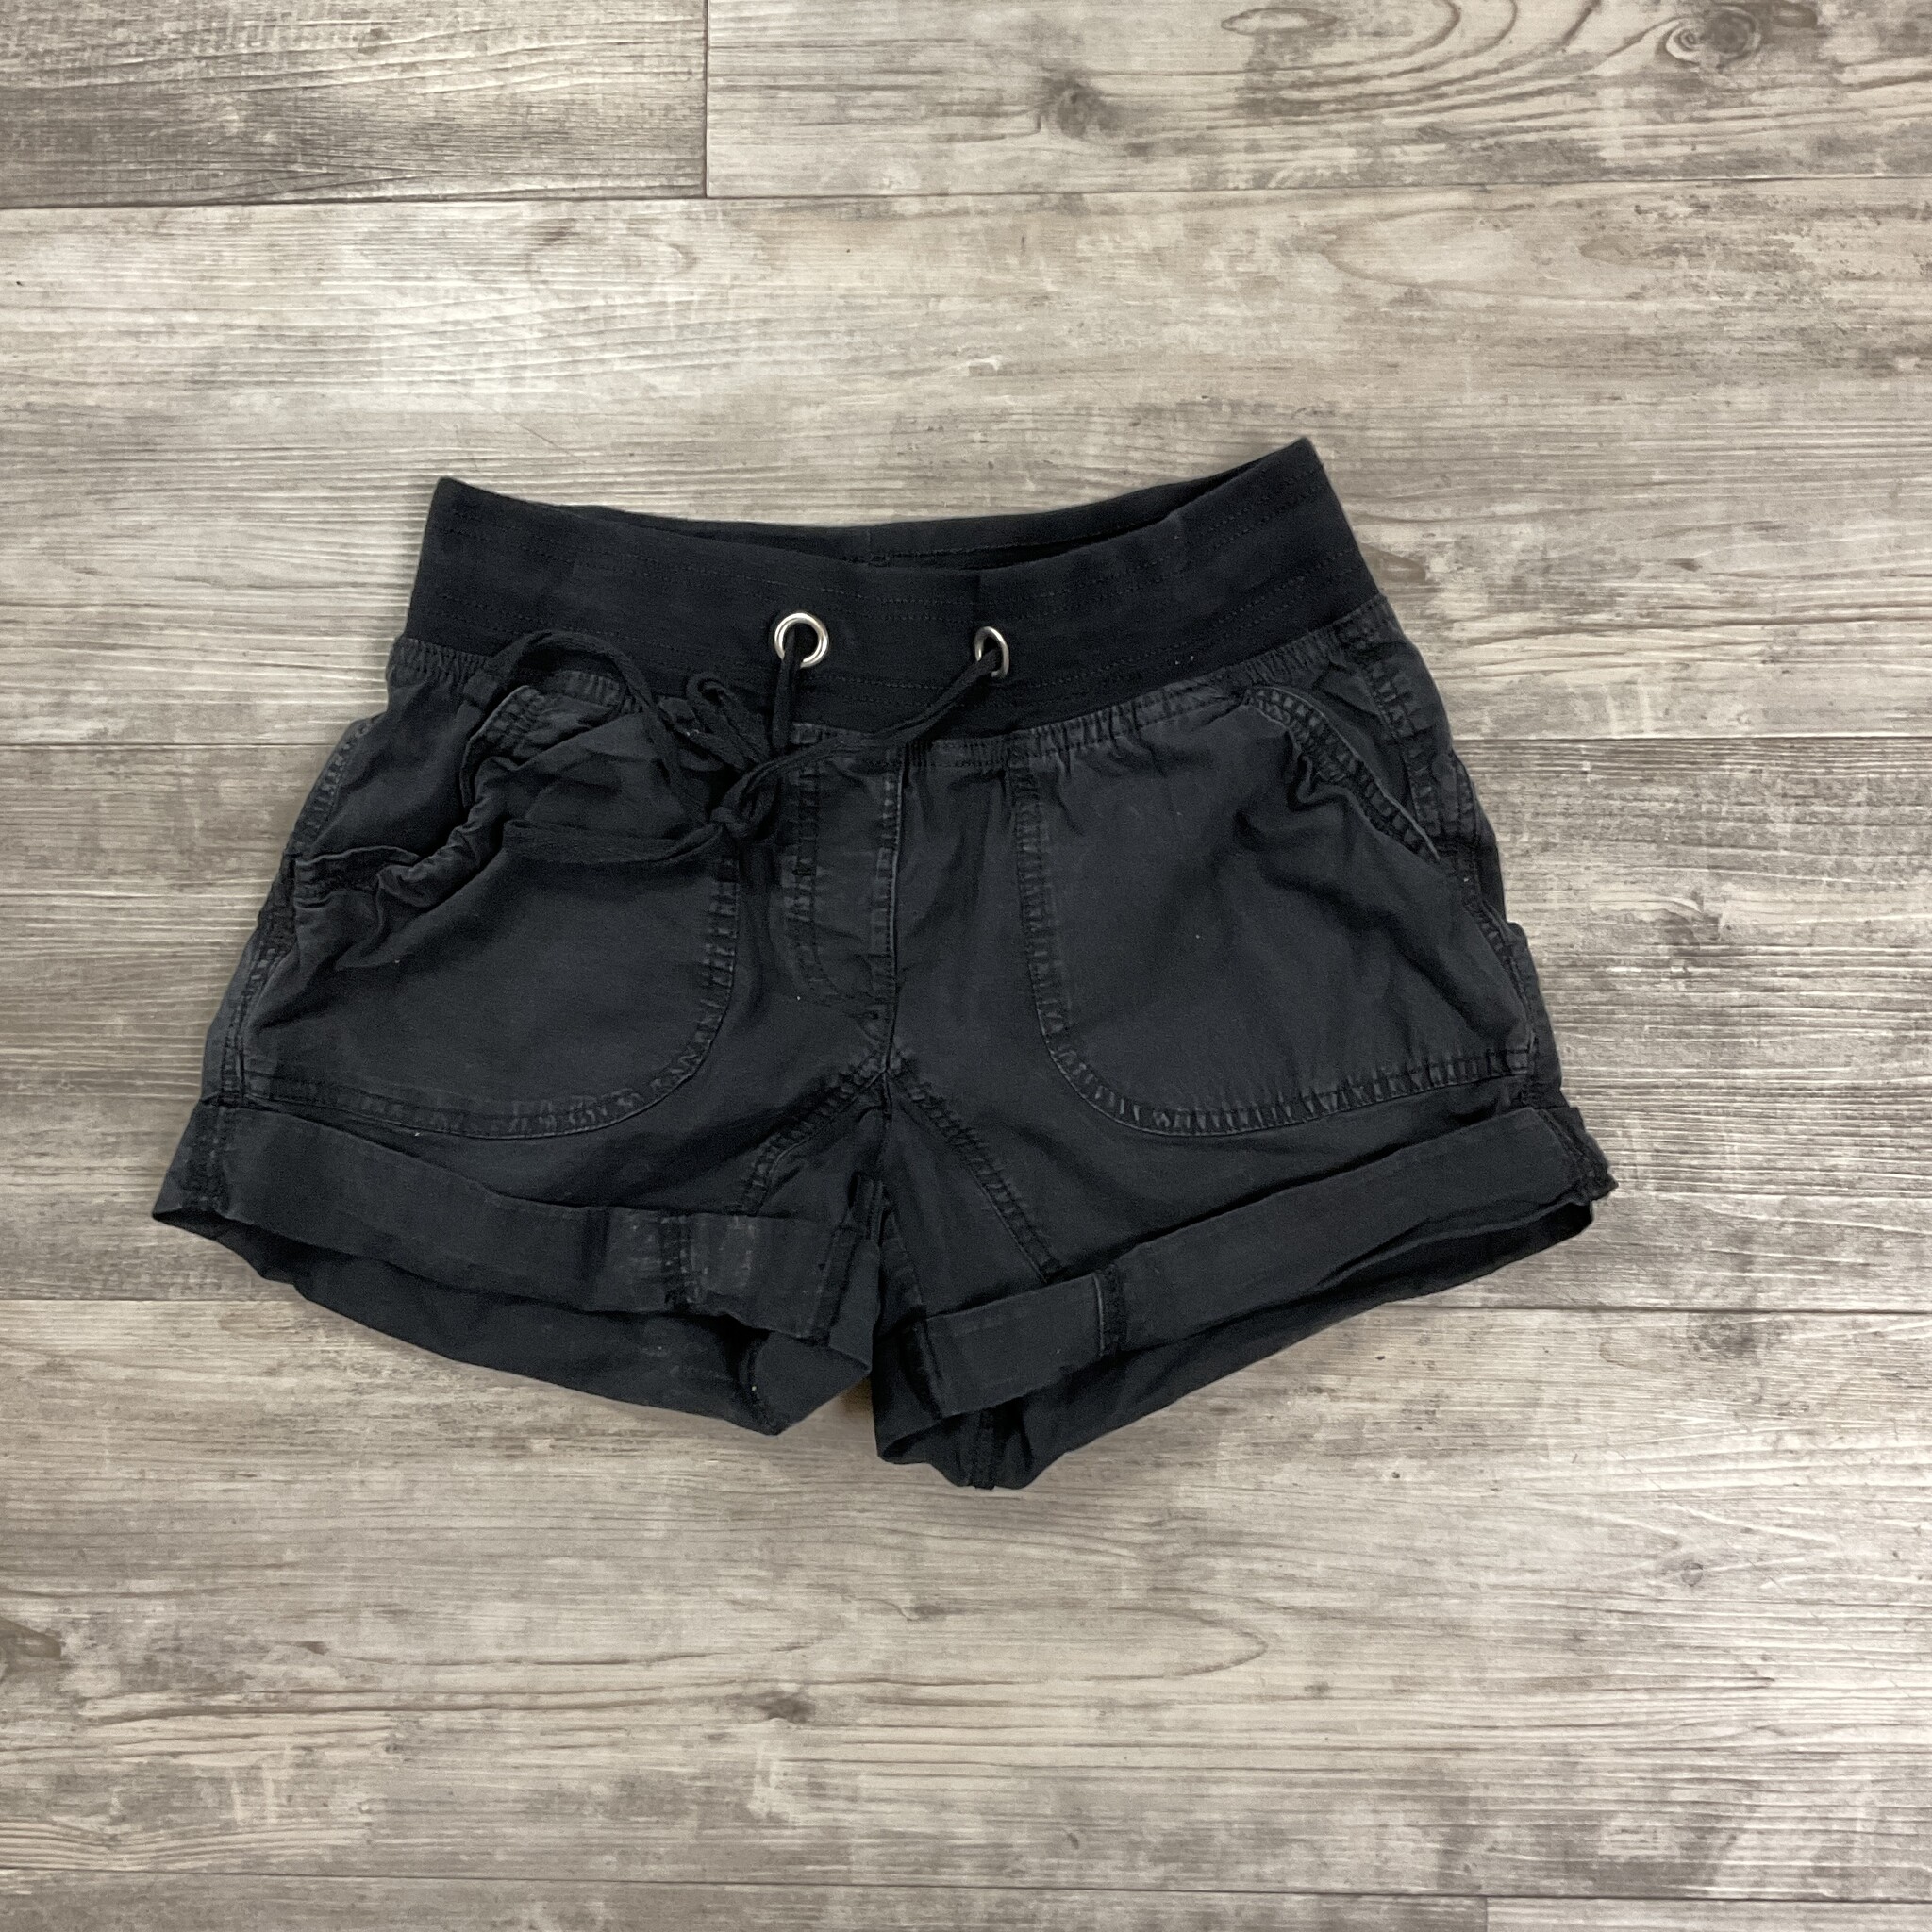 Black Shorts with Pockets and Drawstring - Size S